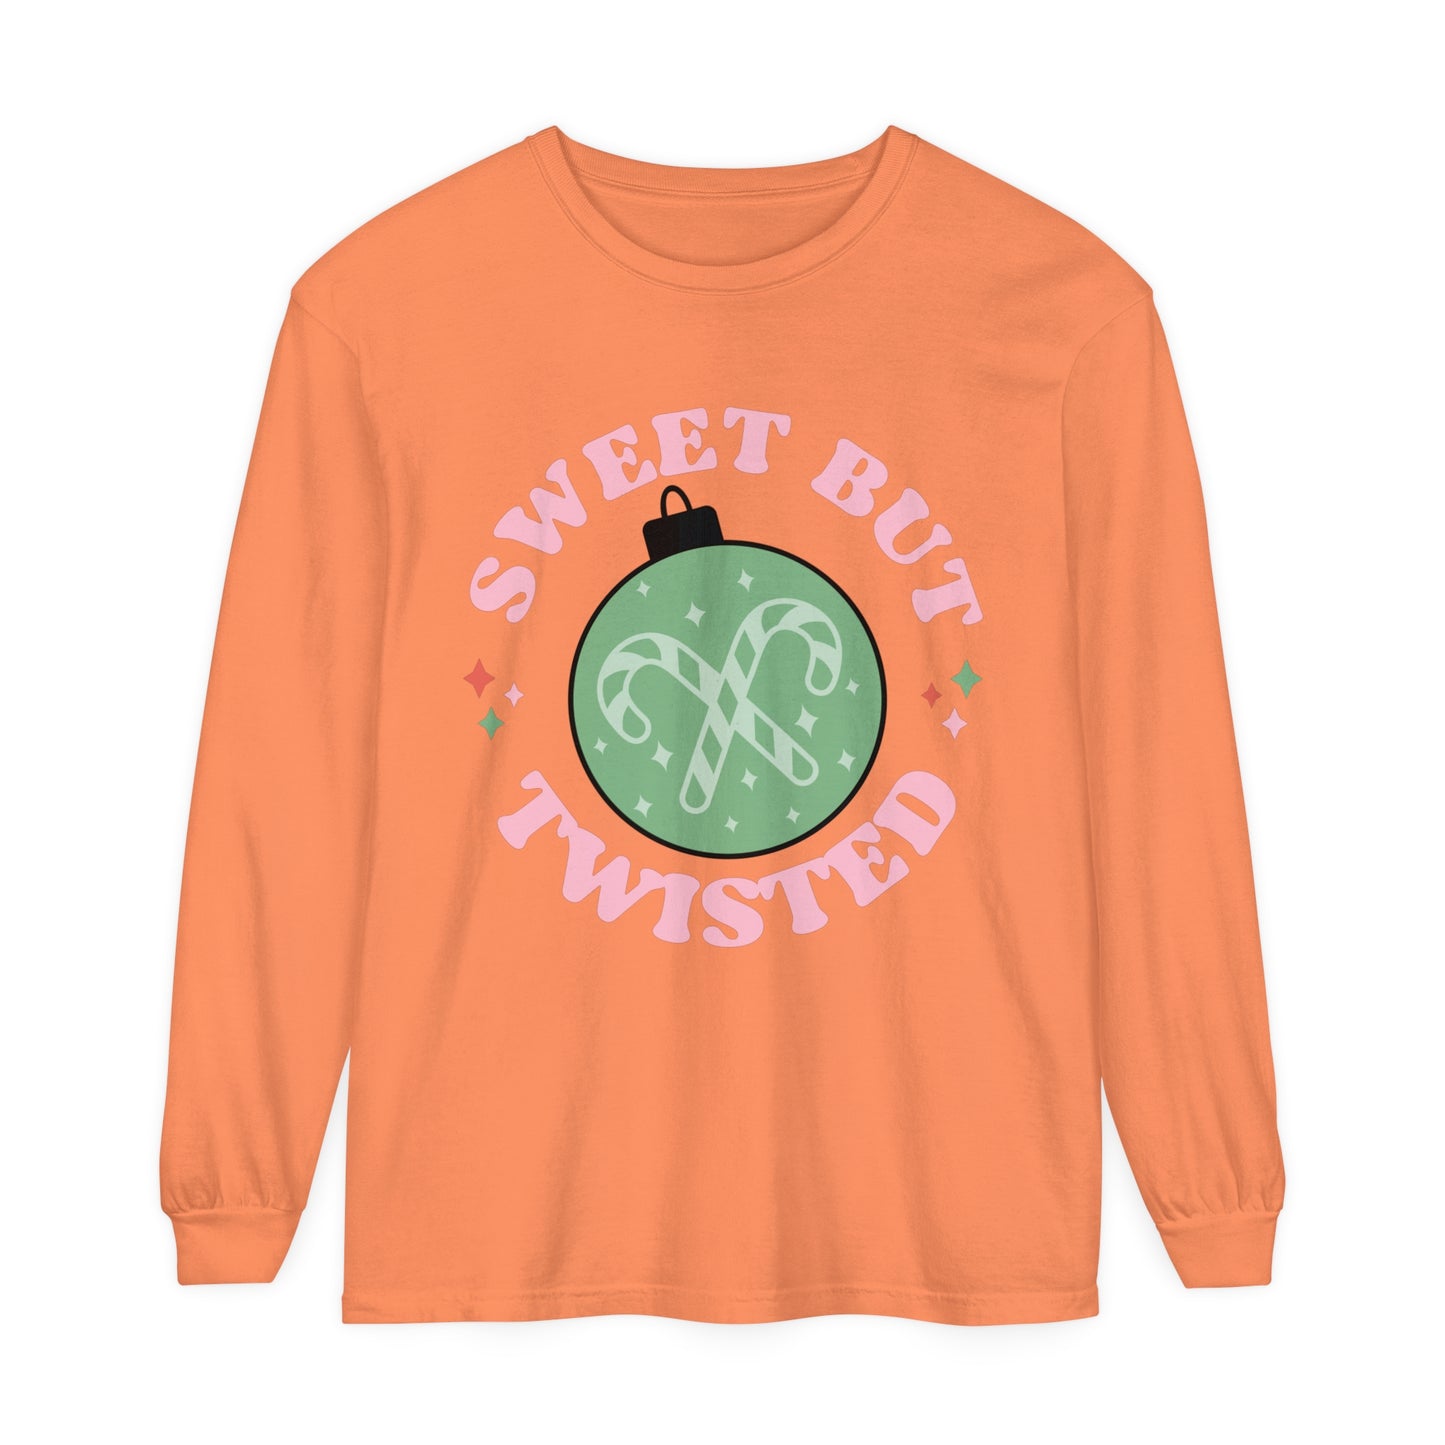 Sweet But Twisted Women's Christmas Holiday Loose Long Sleeve T-Shirt